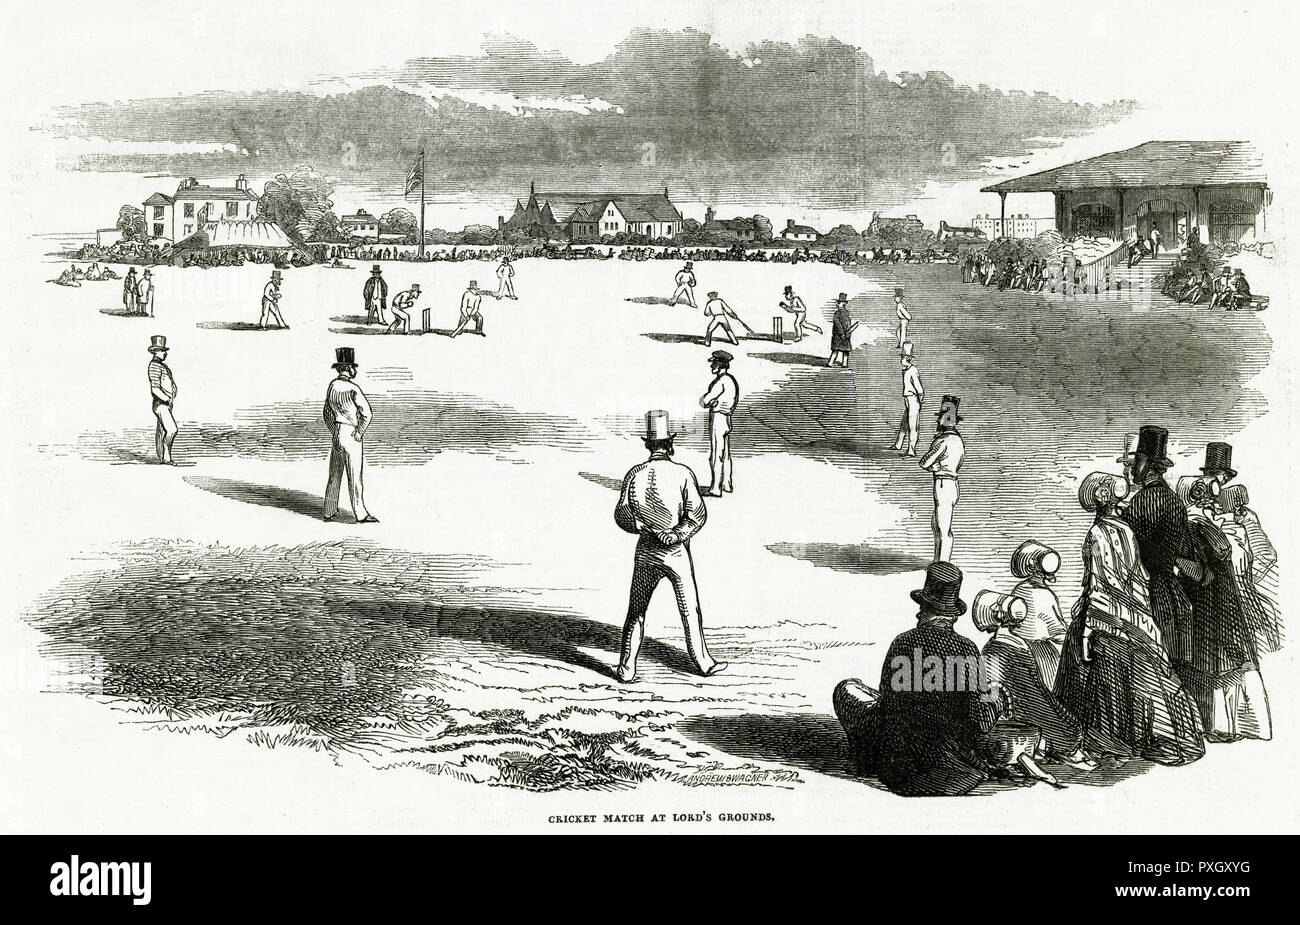 Cricket match at Lord's Grounds 1846 Stock Photo